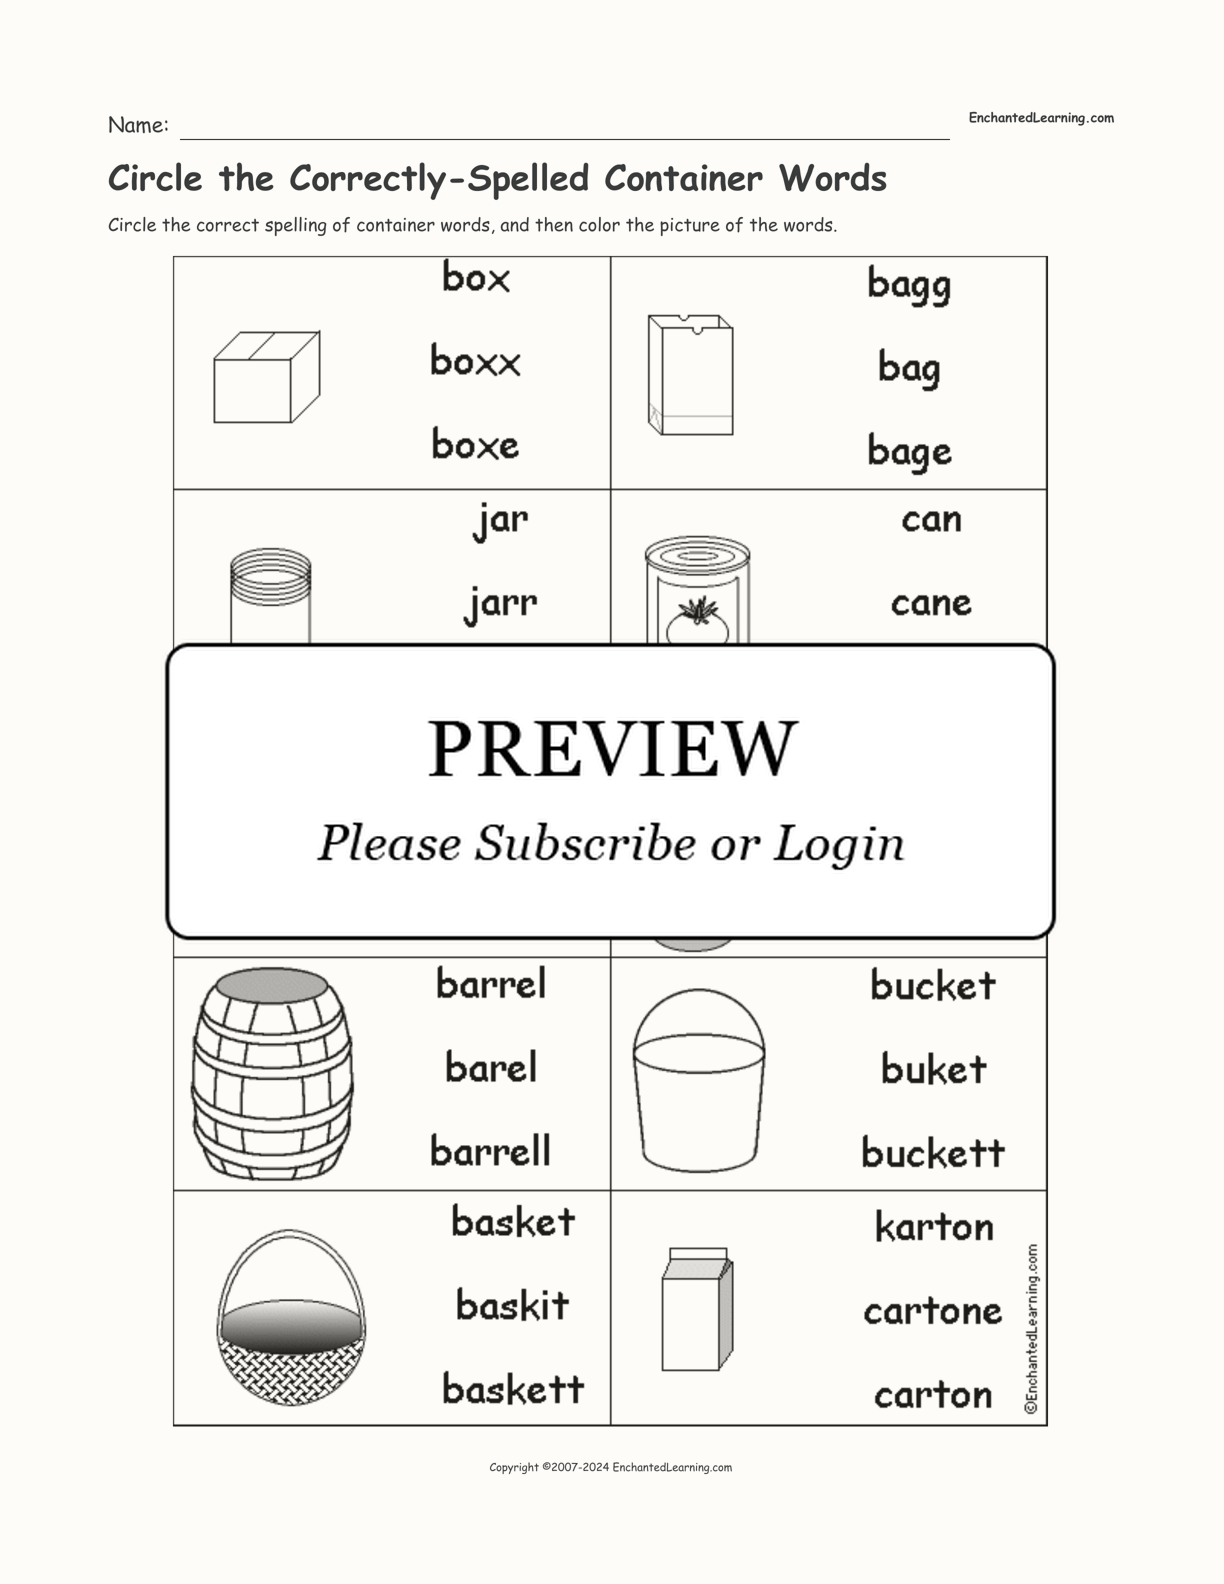 Circle the Correctly-Spelled Container Words interactive worksheet page 1